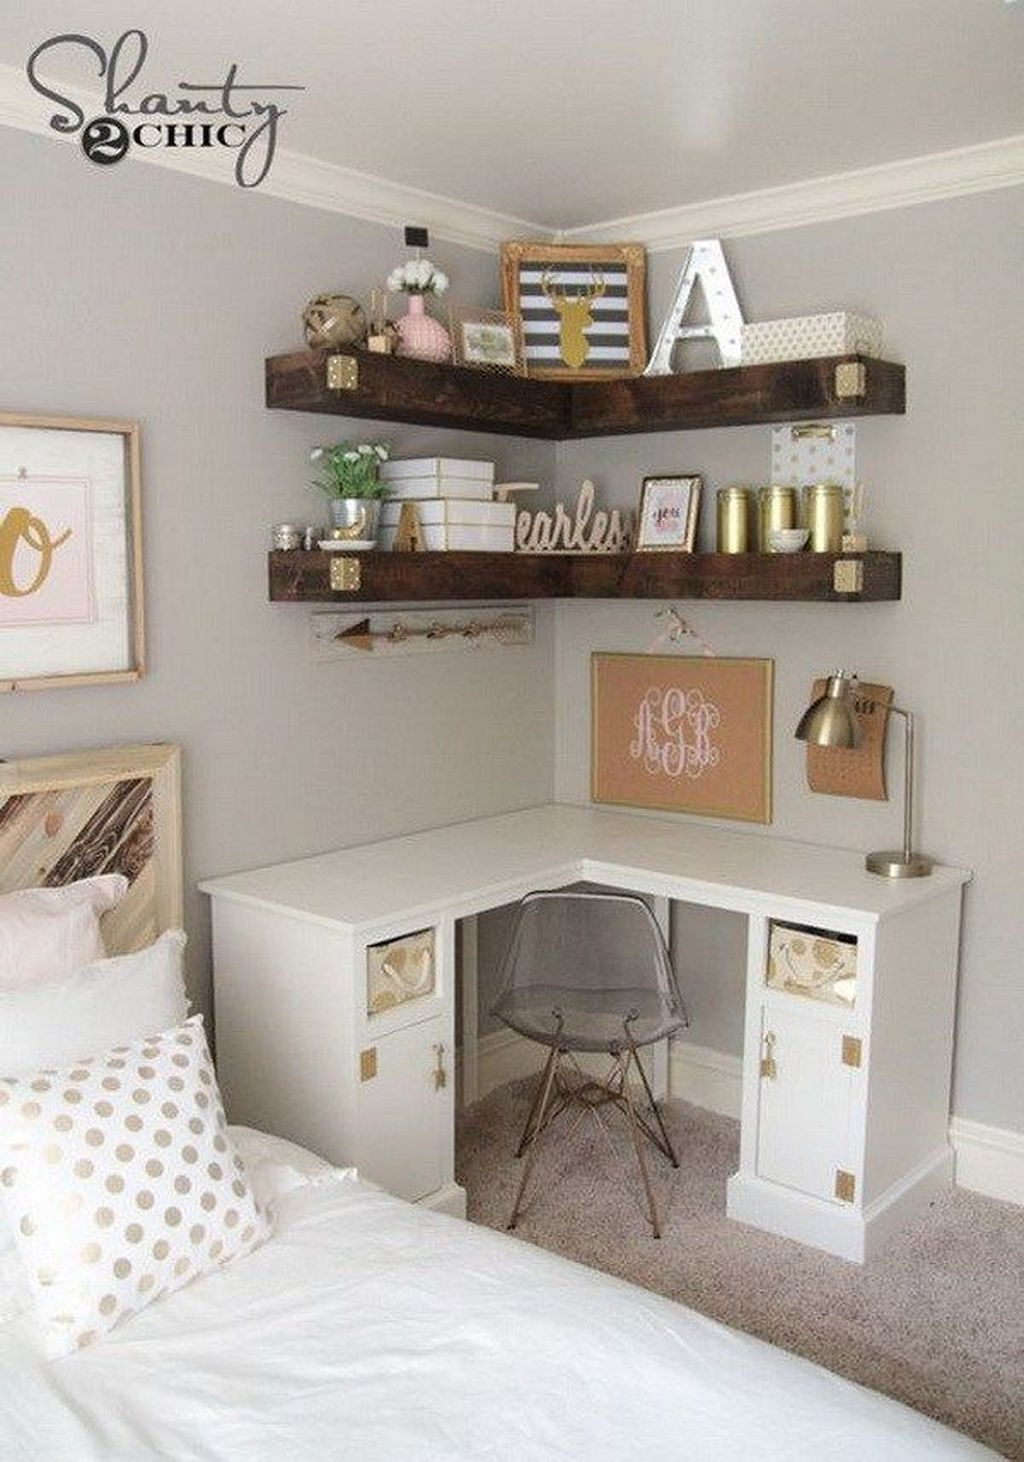 Stunning Teens Bedrooms Design Ideas For Small Spaces To Try 31